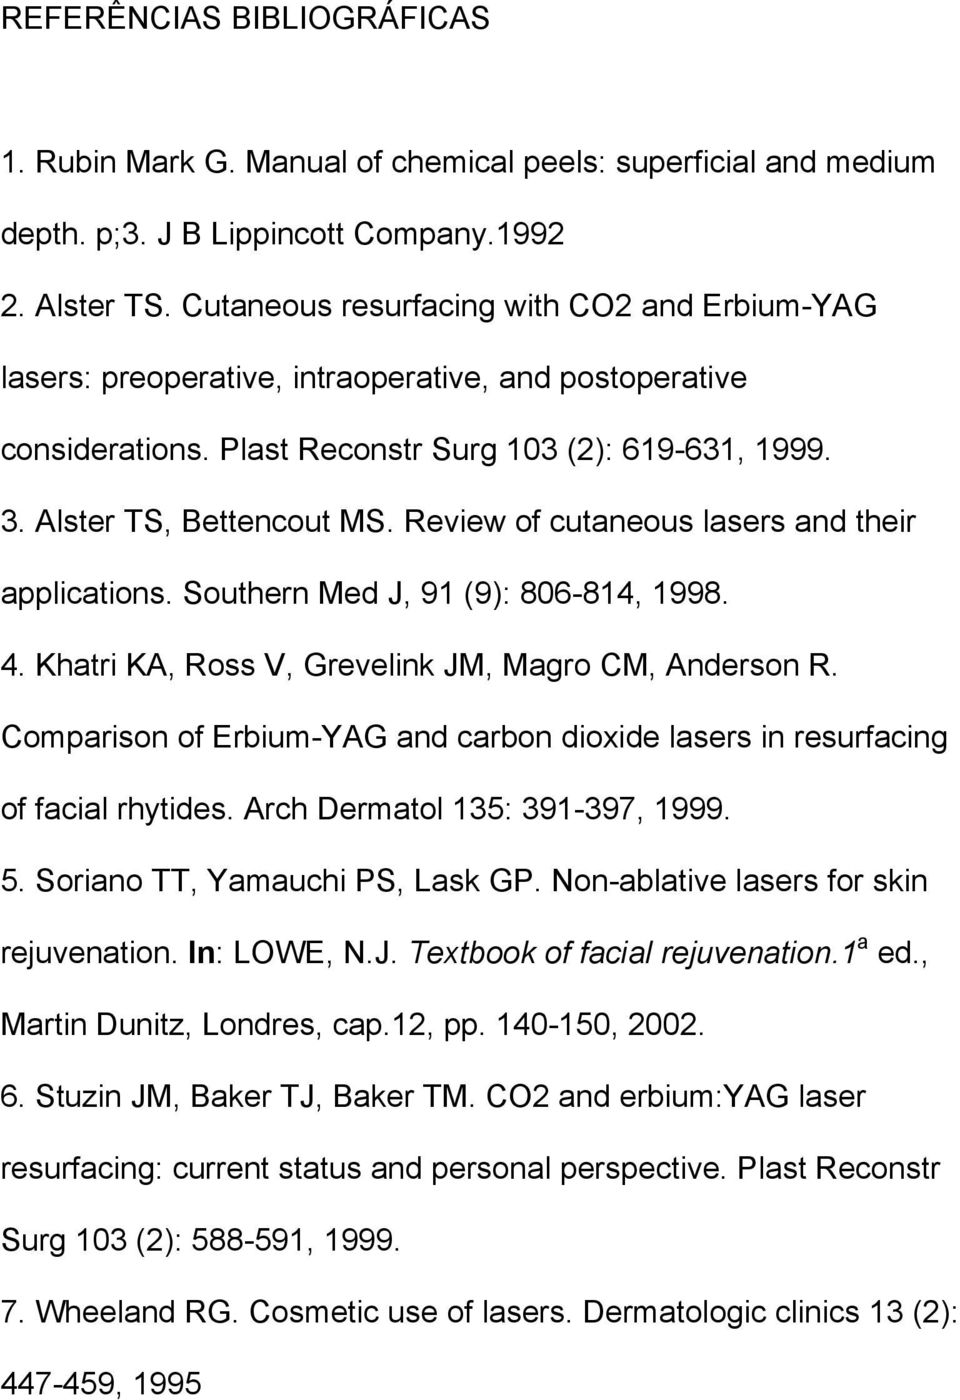 Review of cutaneous lasers and their applications. Southern Med J, 91 (9): 806-814, 1998. 4. Khatri KA, Ross V, Grevelink JM, Magro CM, Anderson R.